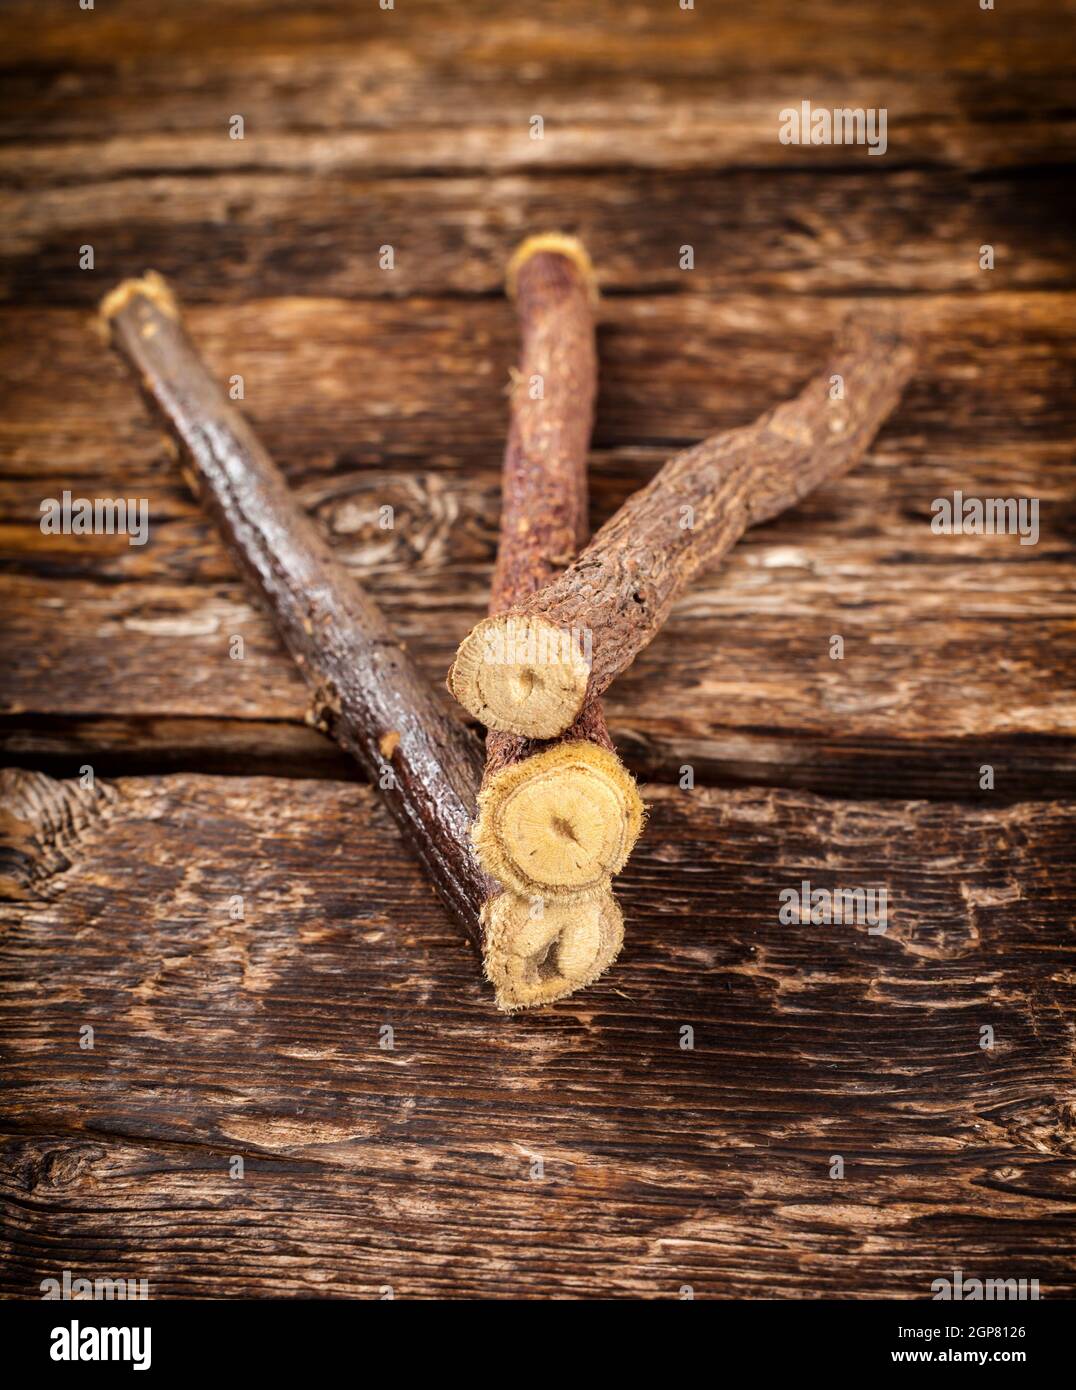 Close up of Licorice roots on wooden table. Stock Photo